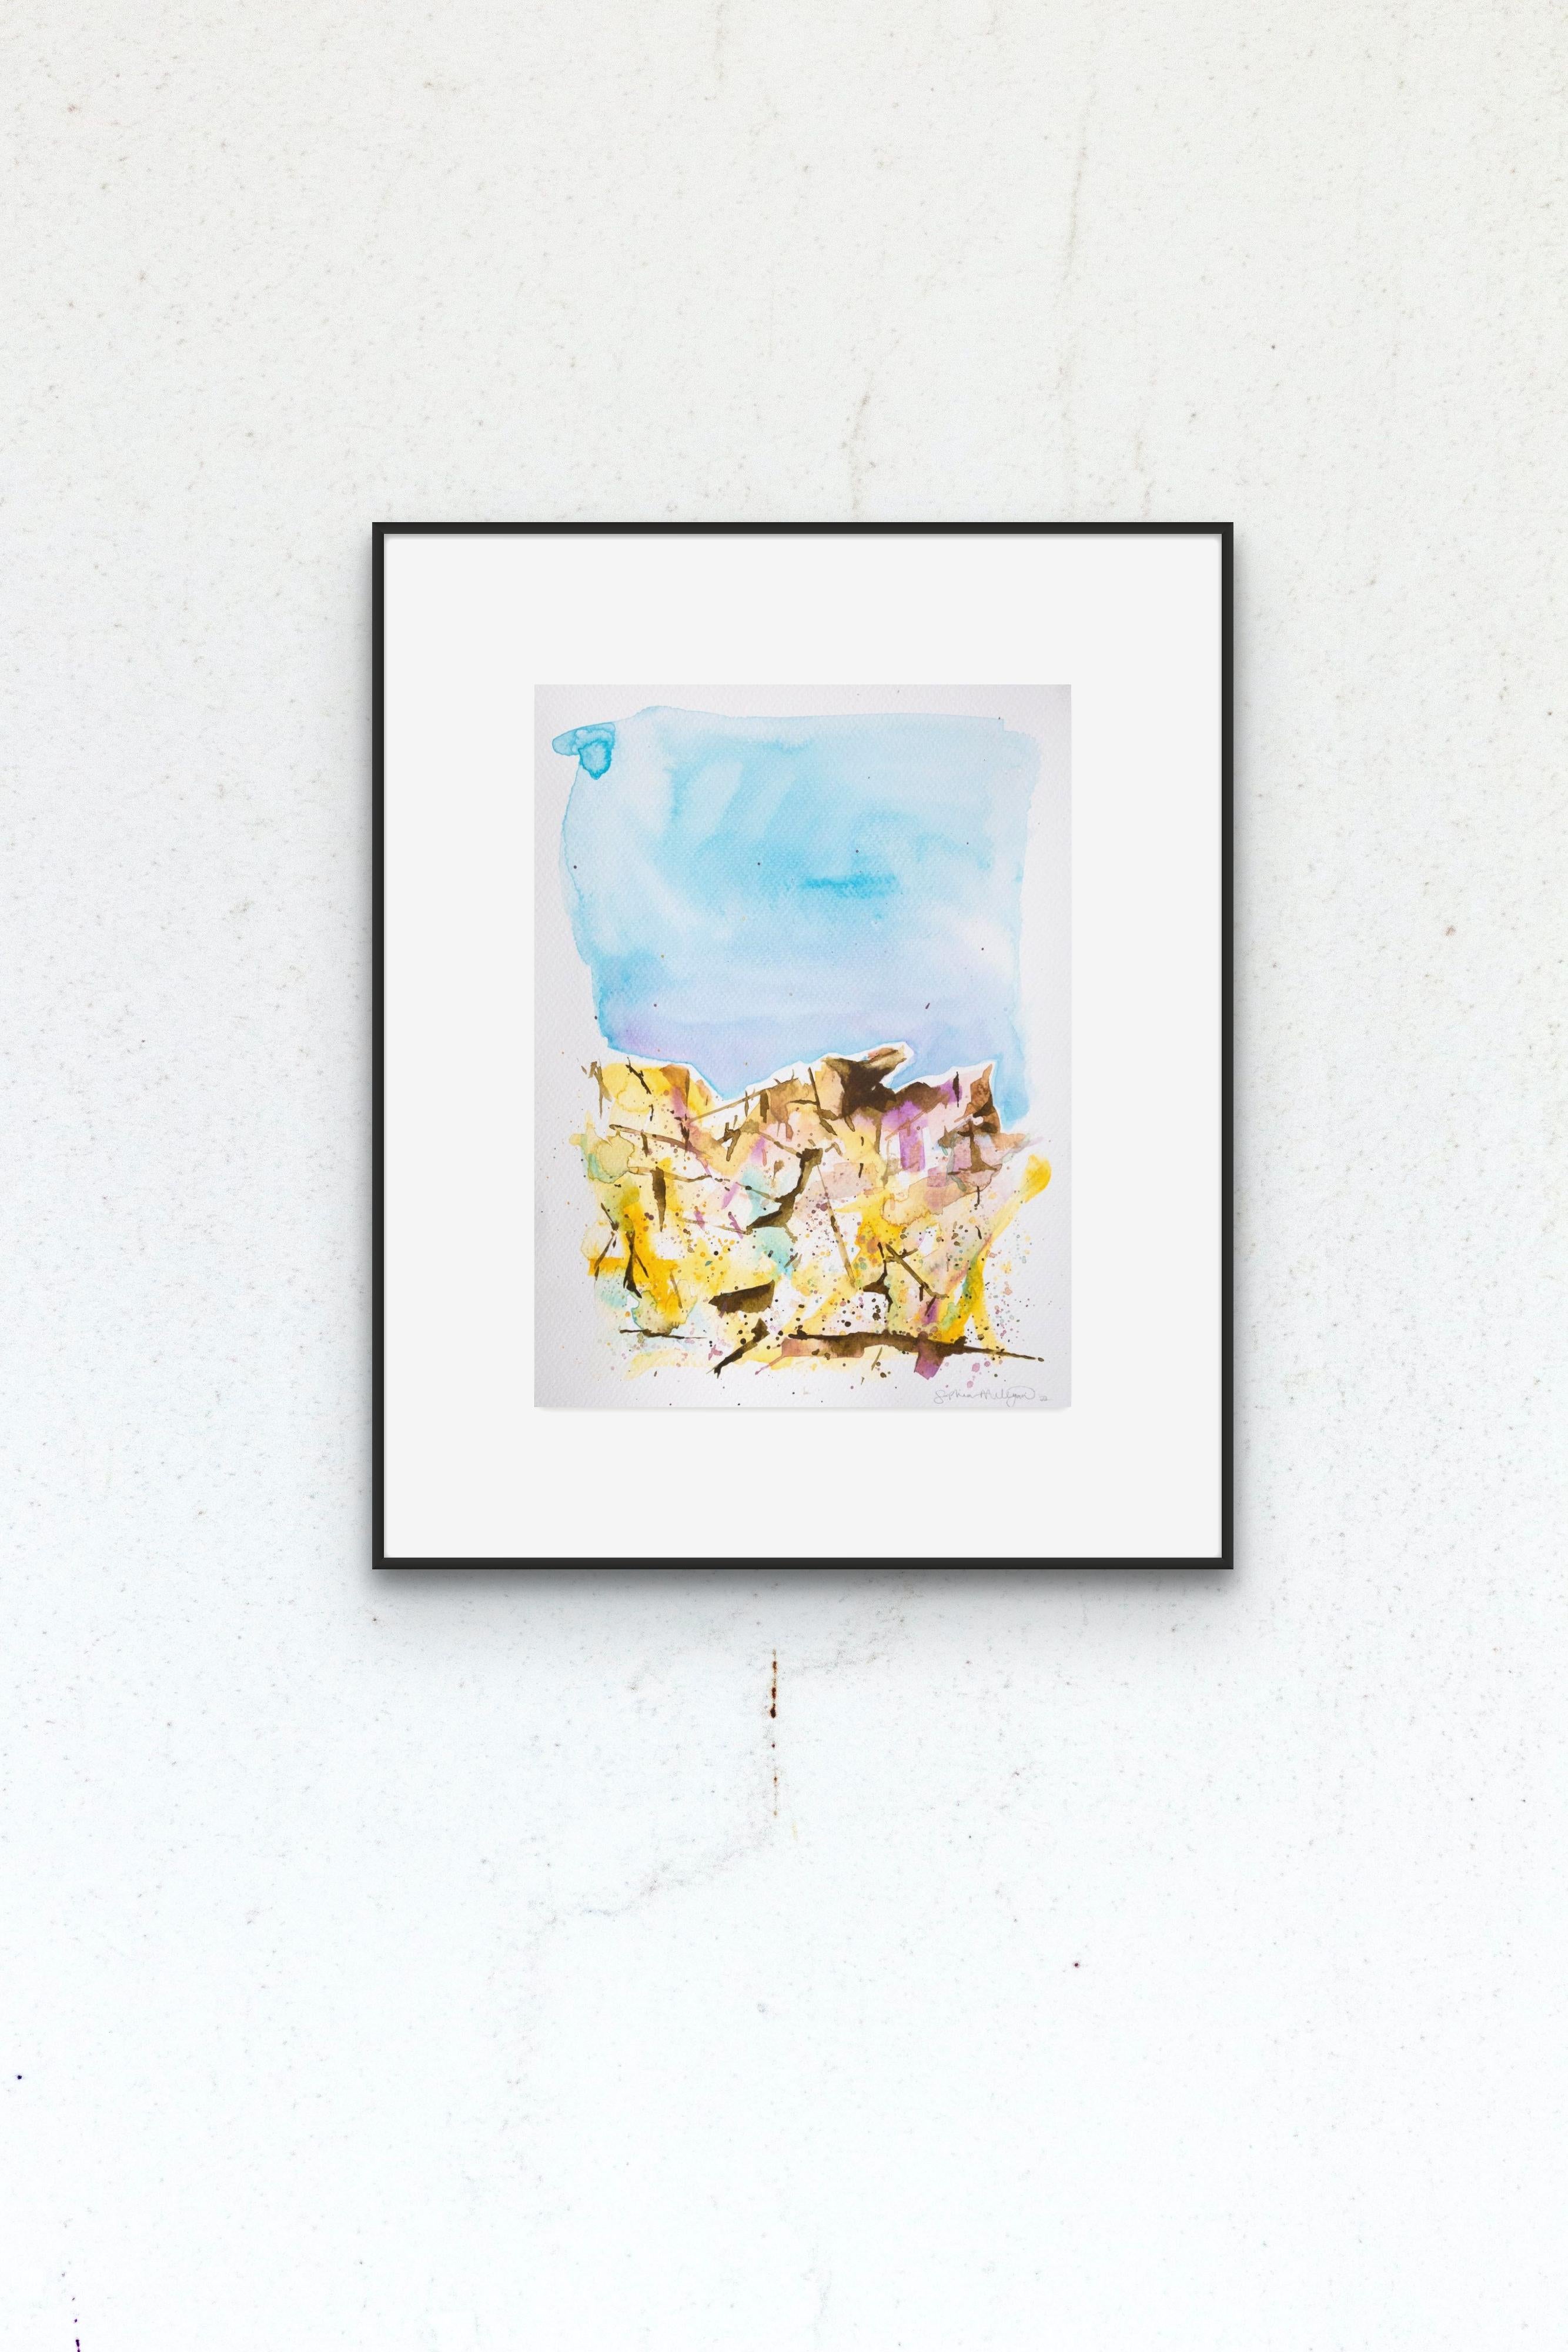 SOPHIA MILLIGAN
'Prye'
Original Artwork, Unframed
_________________

Plein air contemporary watercolour painting from the series 'Stone and Air'. 
A work in hot pastel colors reflecting the high summer heat on the sculptural forms of the ancient